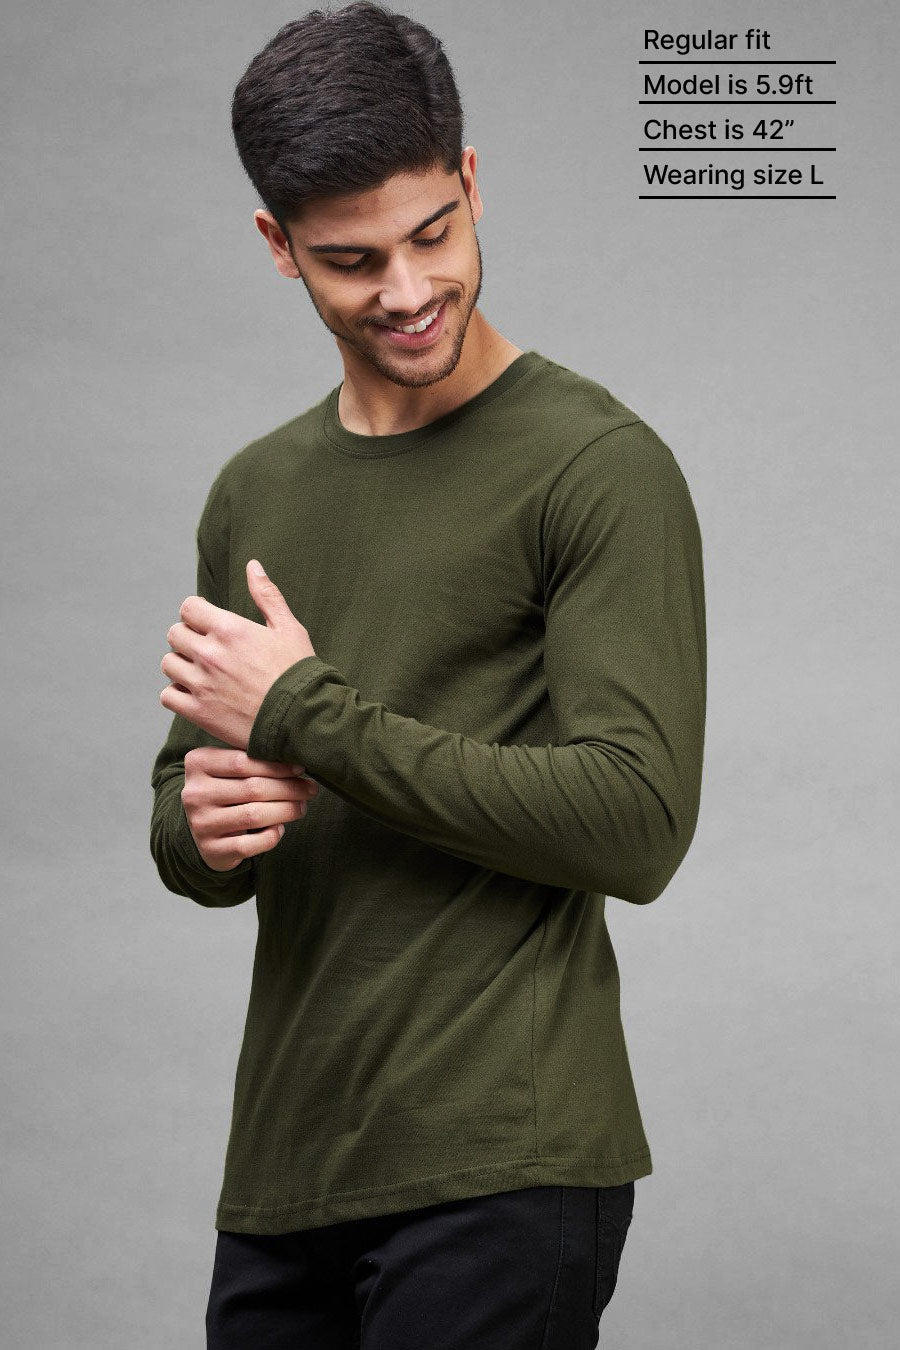 Classic Full sleeve in Olive